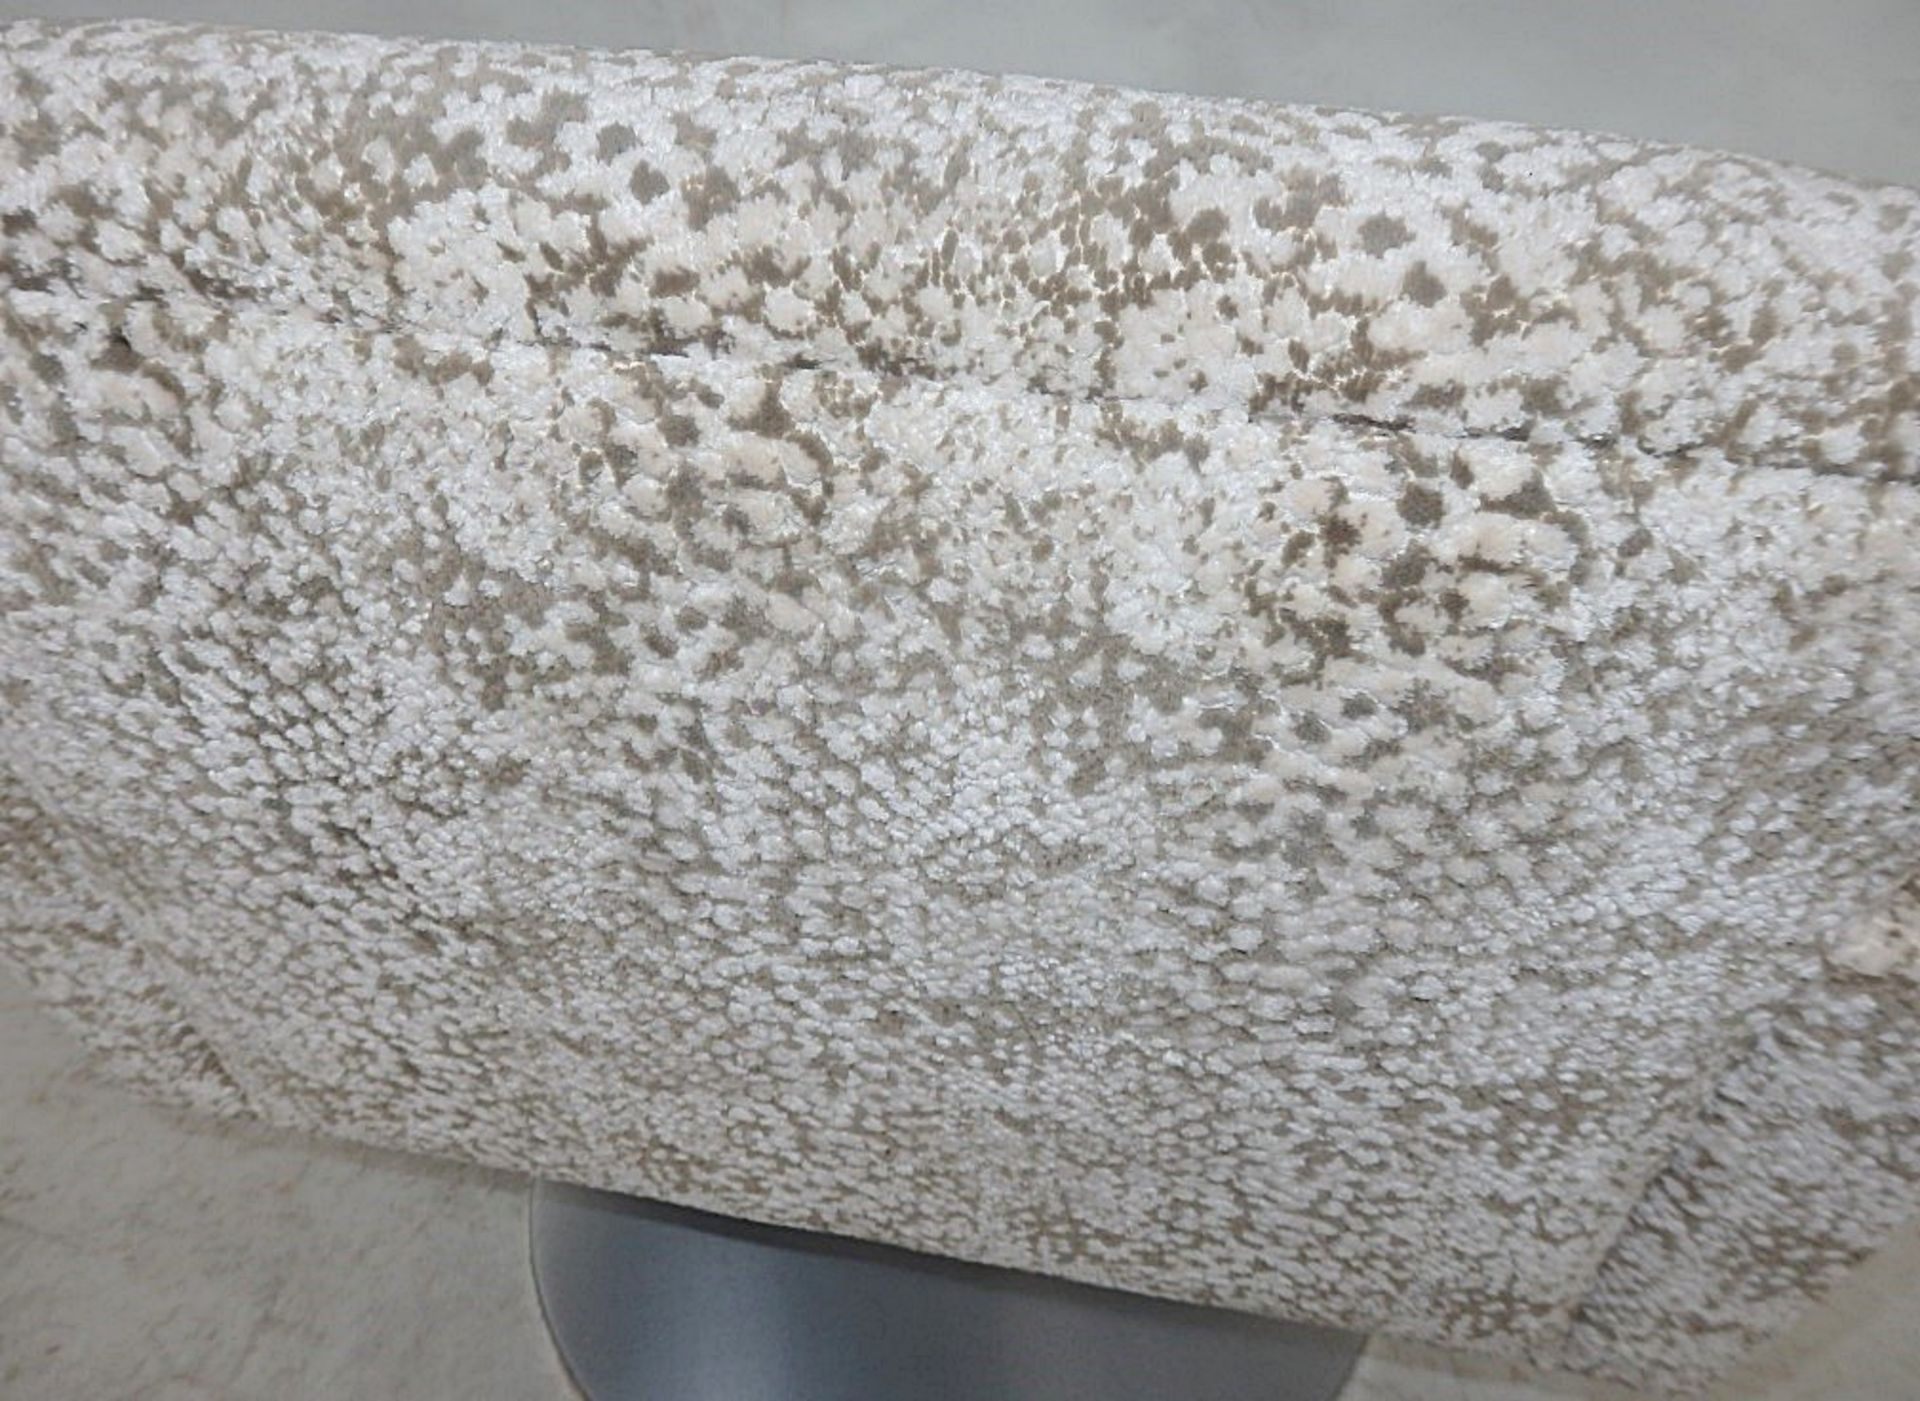 1 x Small Bespoke Swivel Chair - Upholstered In A Rich Mottled Chenille - Dimensions: W x H x D cm - - Image 2 of 5